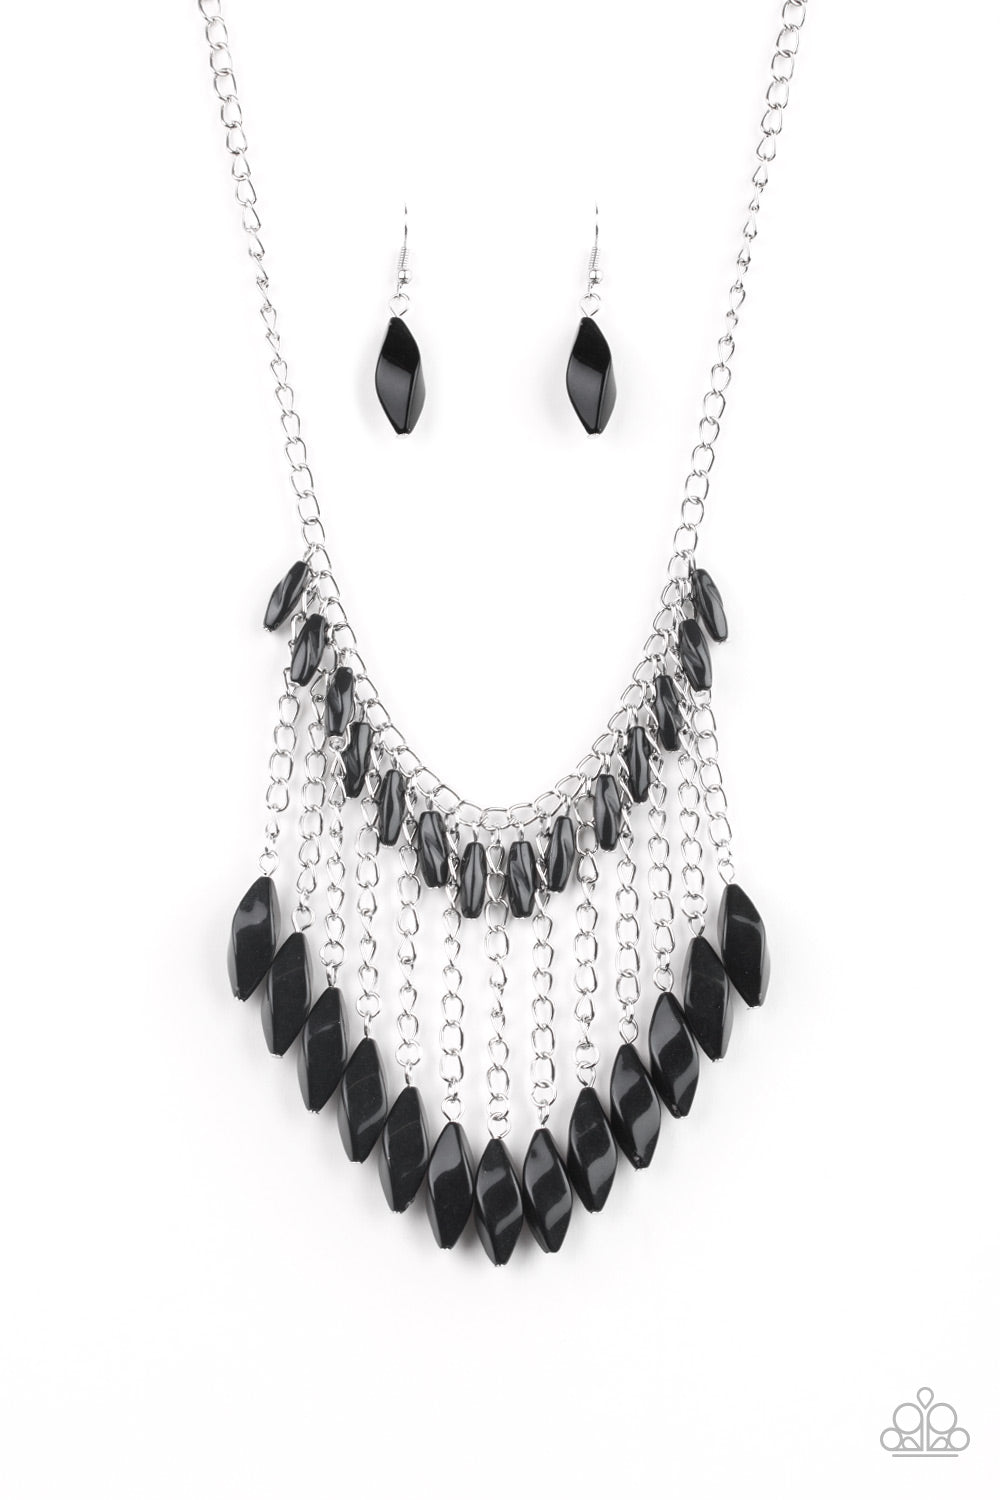 Only For Special Occasions - black - Paparazzi necklace – JewelryBlingThing